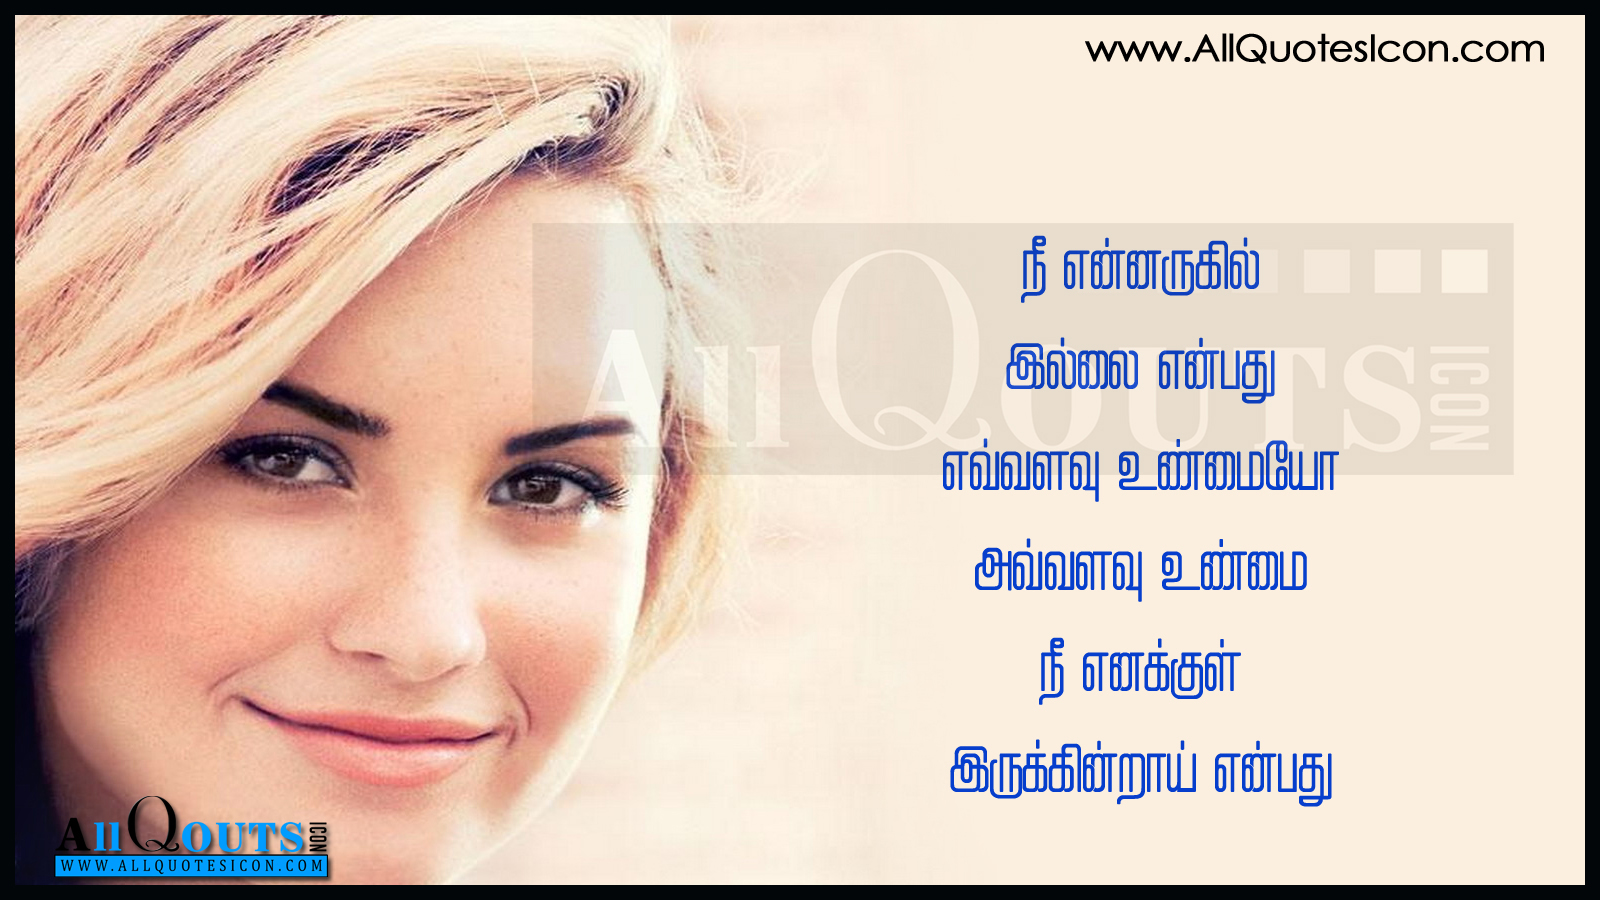 Love Quotes in Tamil Tamil Quotes 11 12 00 PM